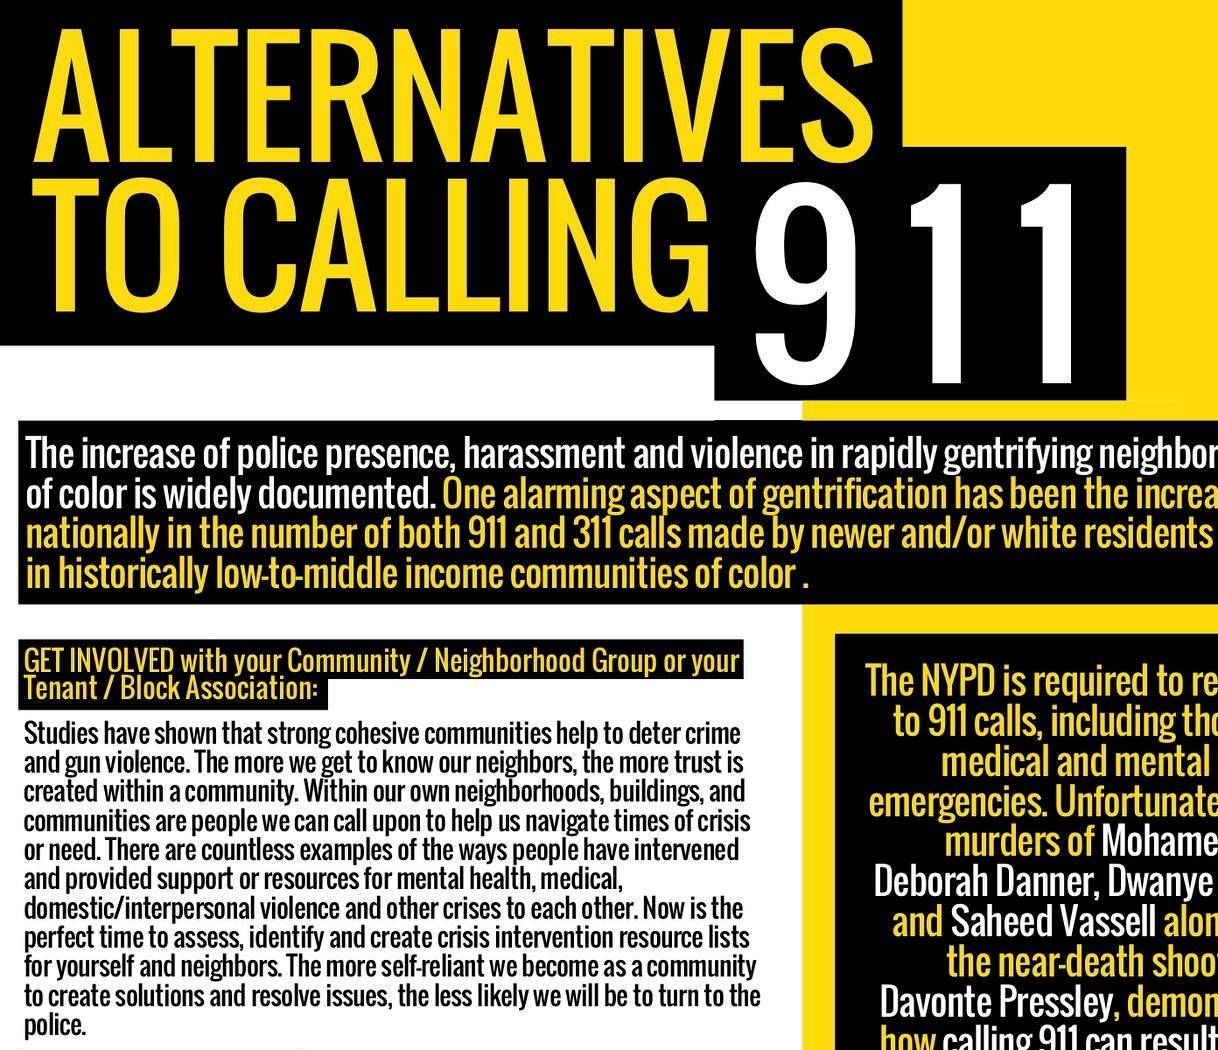 Graphic with text about "Alternatives to Calling 911", by Equality for Flatbush. Transcript of the text is linked below.